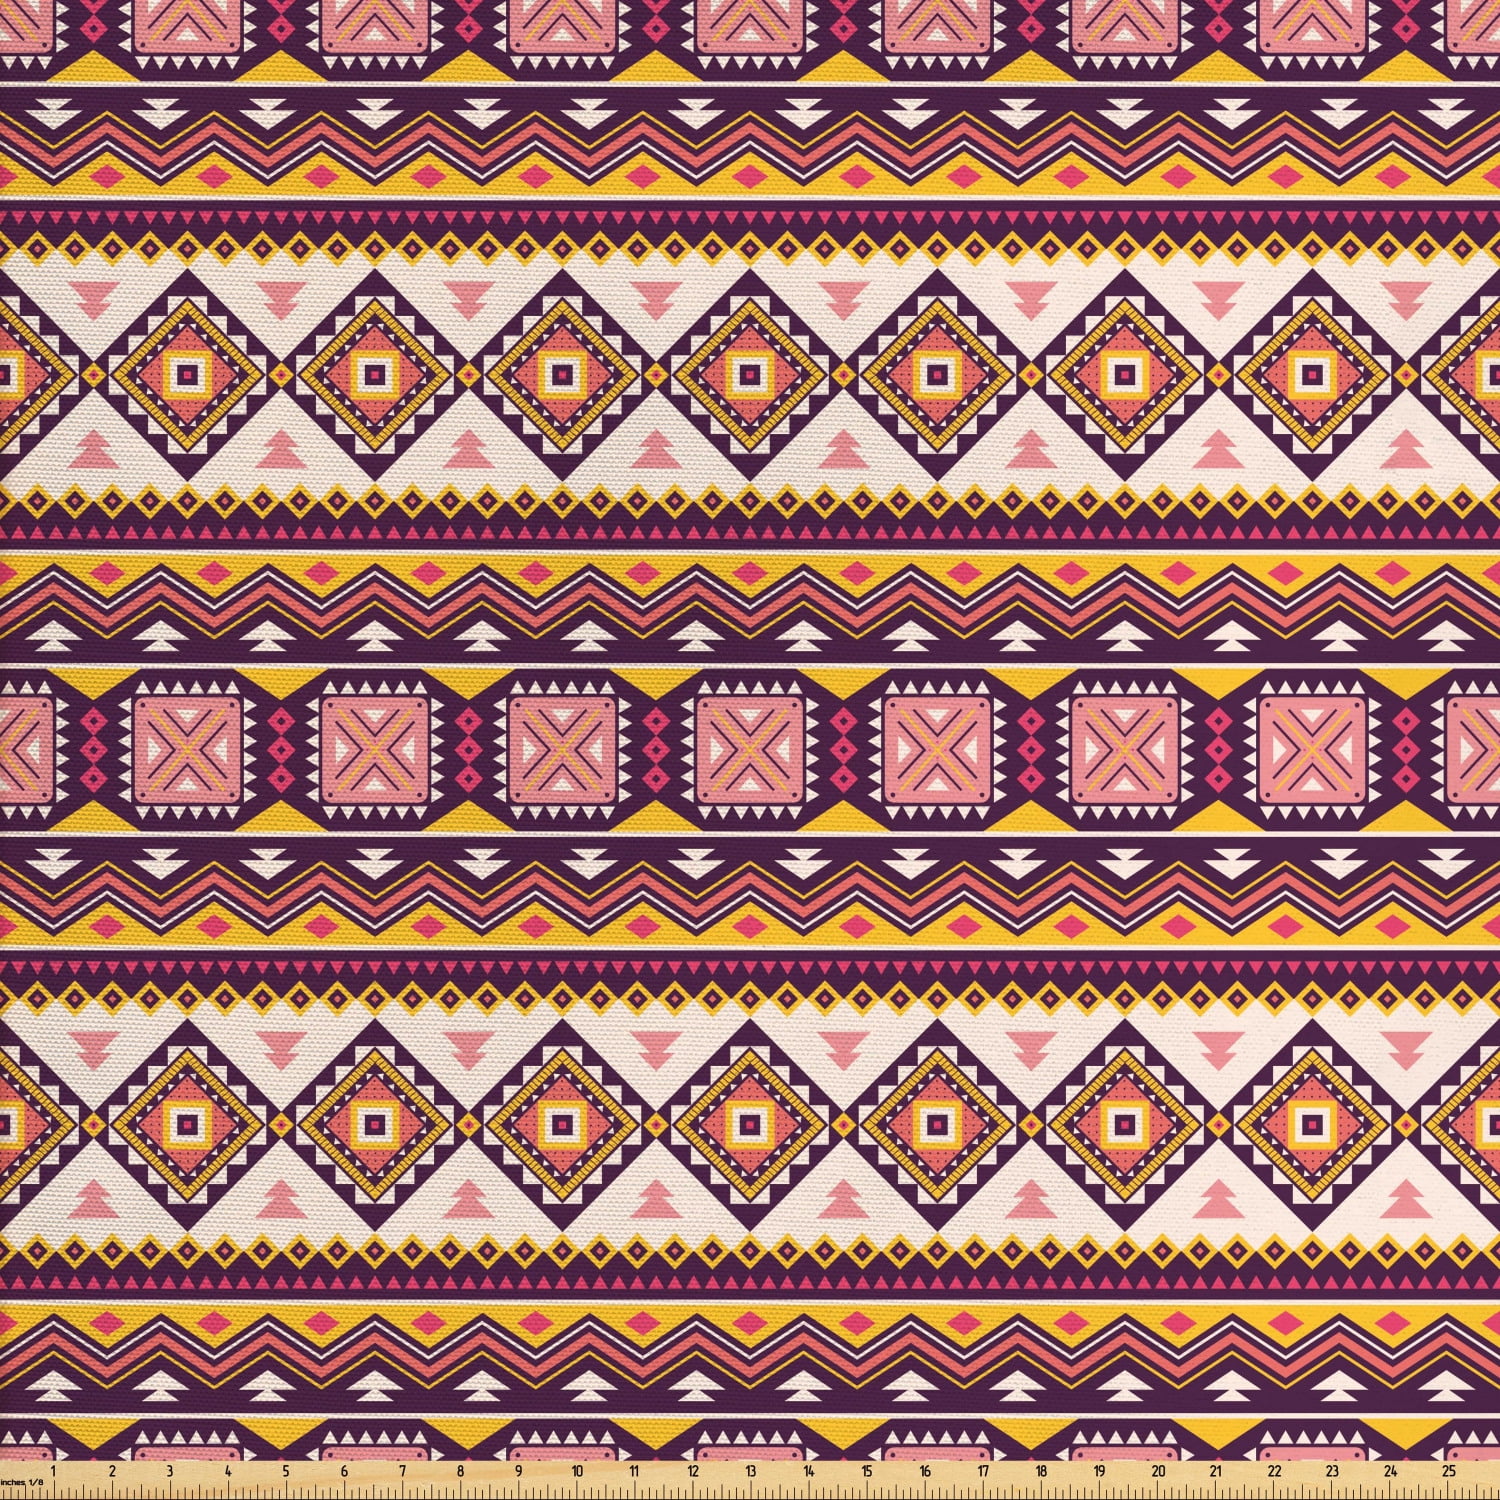 Aztec Fabric by The Yard, Mexican Triangles Vibrant Tones Repetitive ...